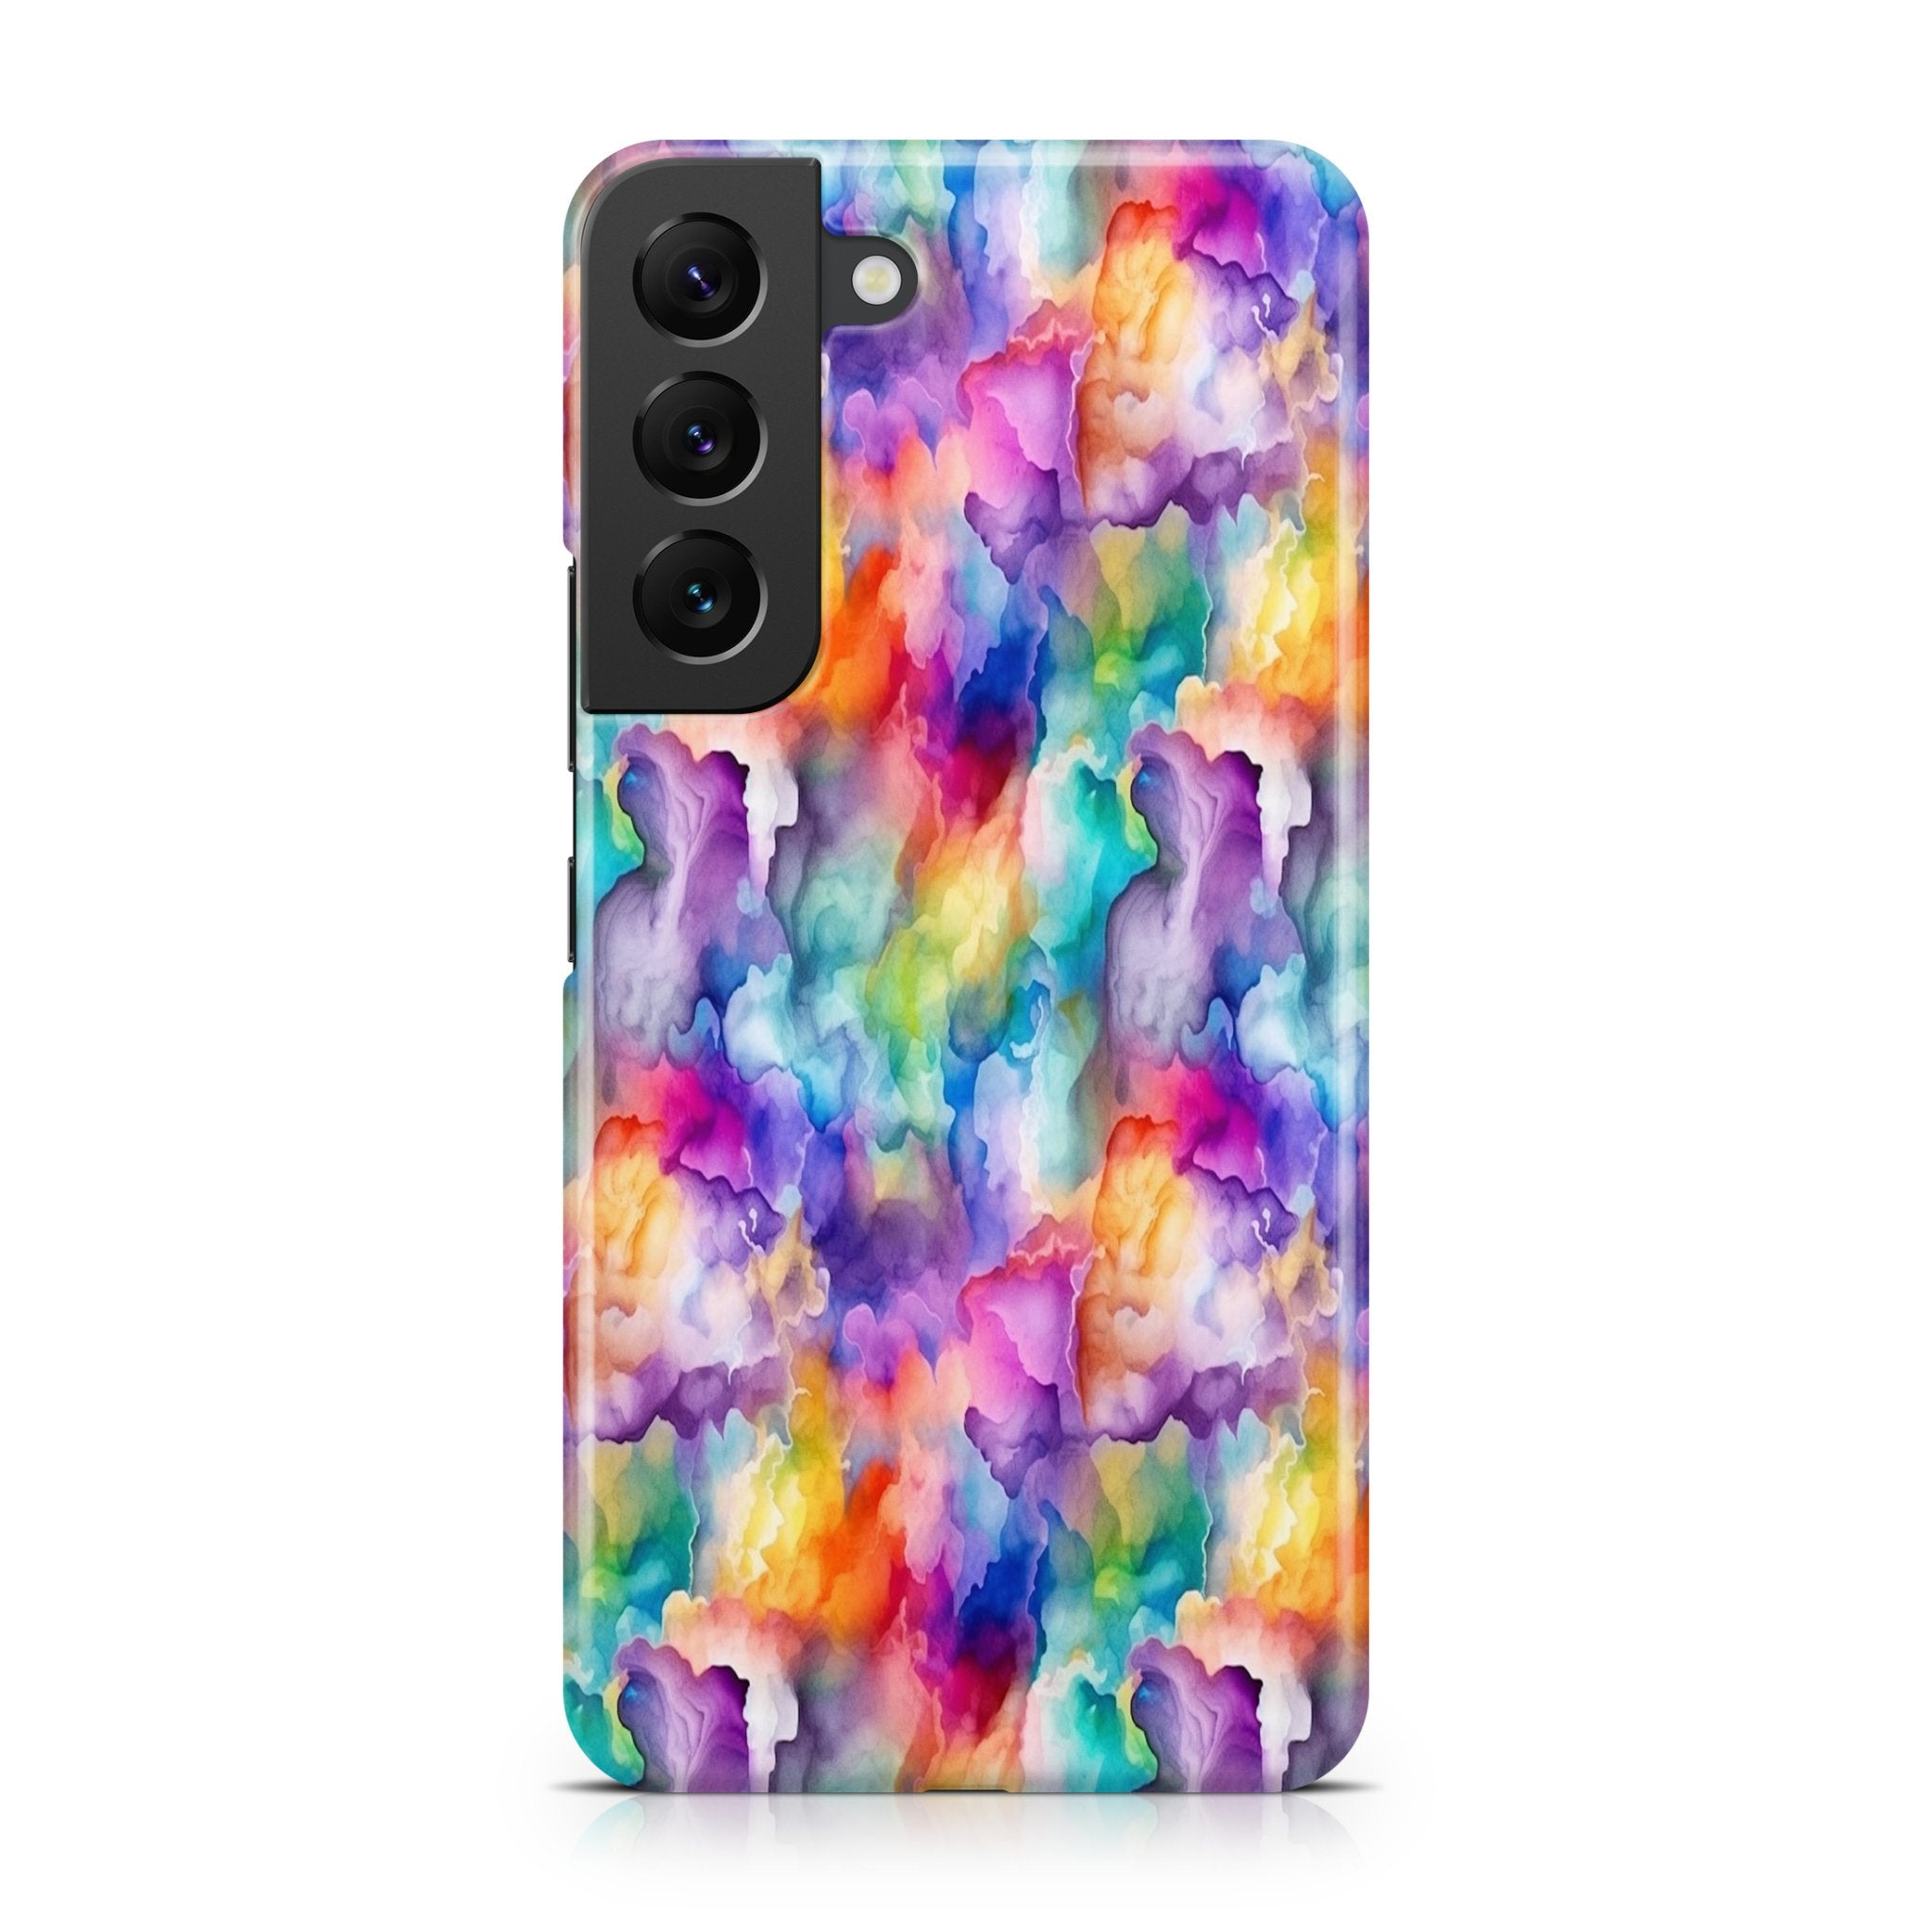 Chromatic Nimbus - Samsung phone case designs by CaseSwagger